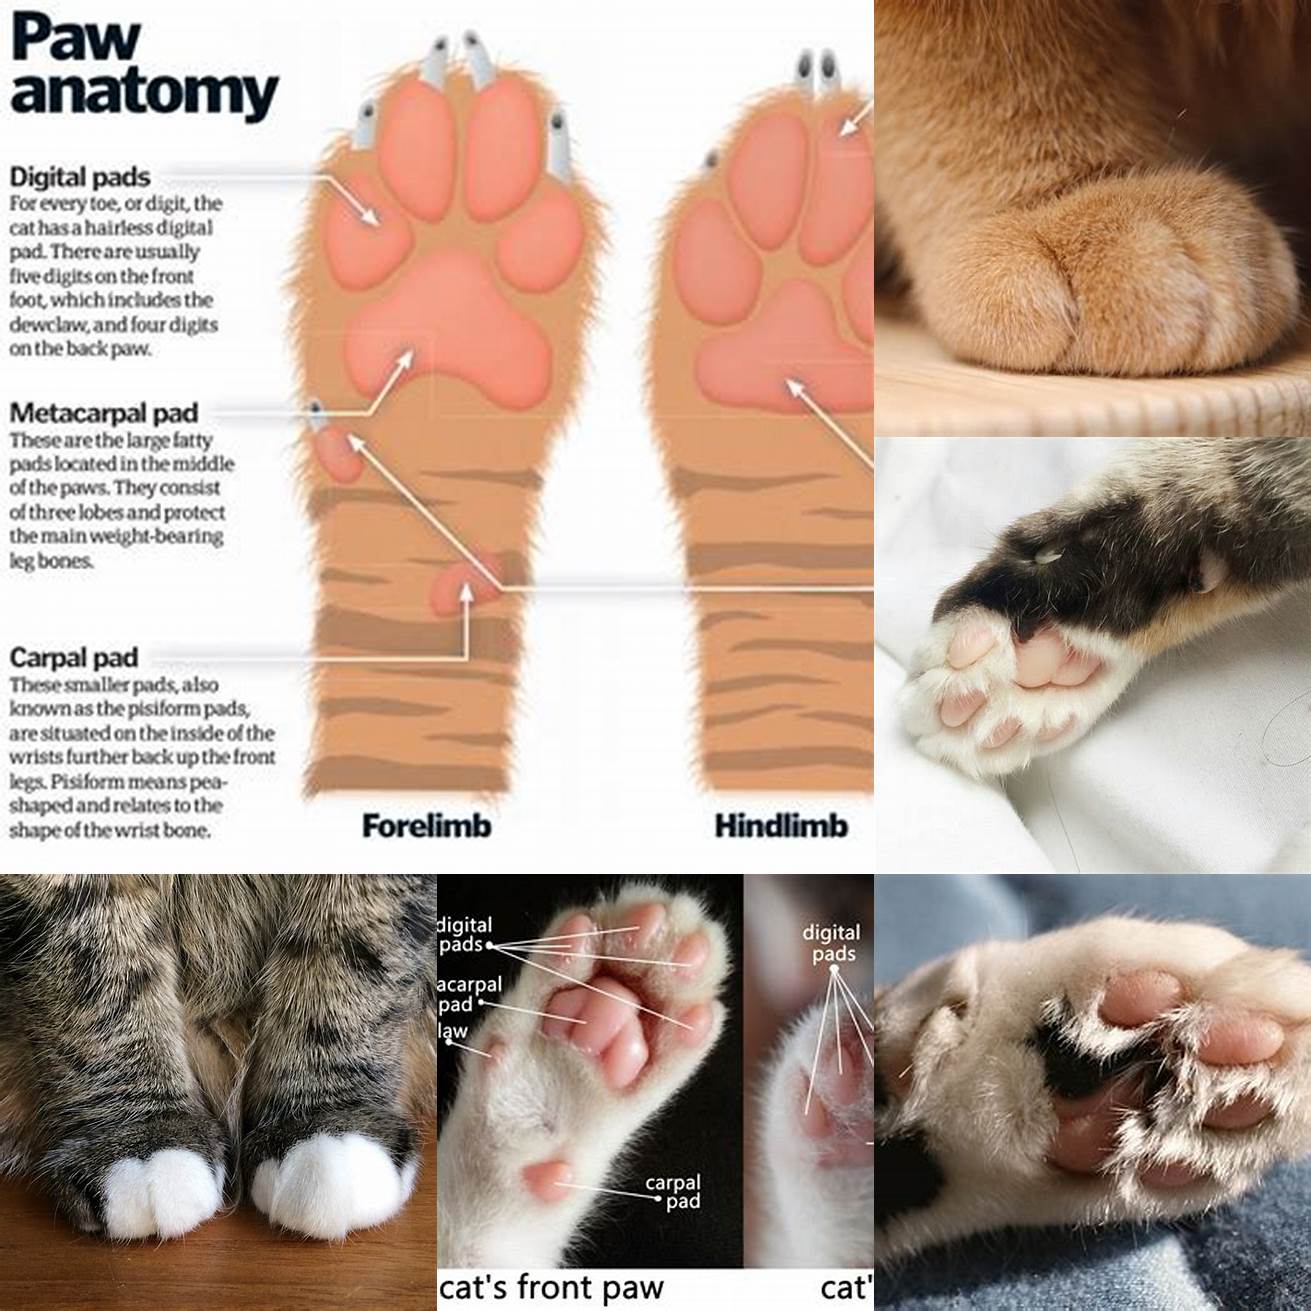 Changes in the appearance of the paw